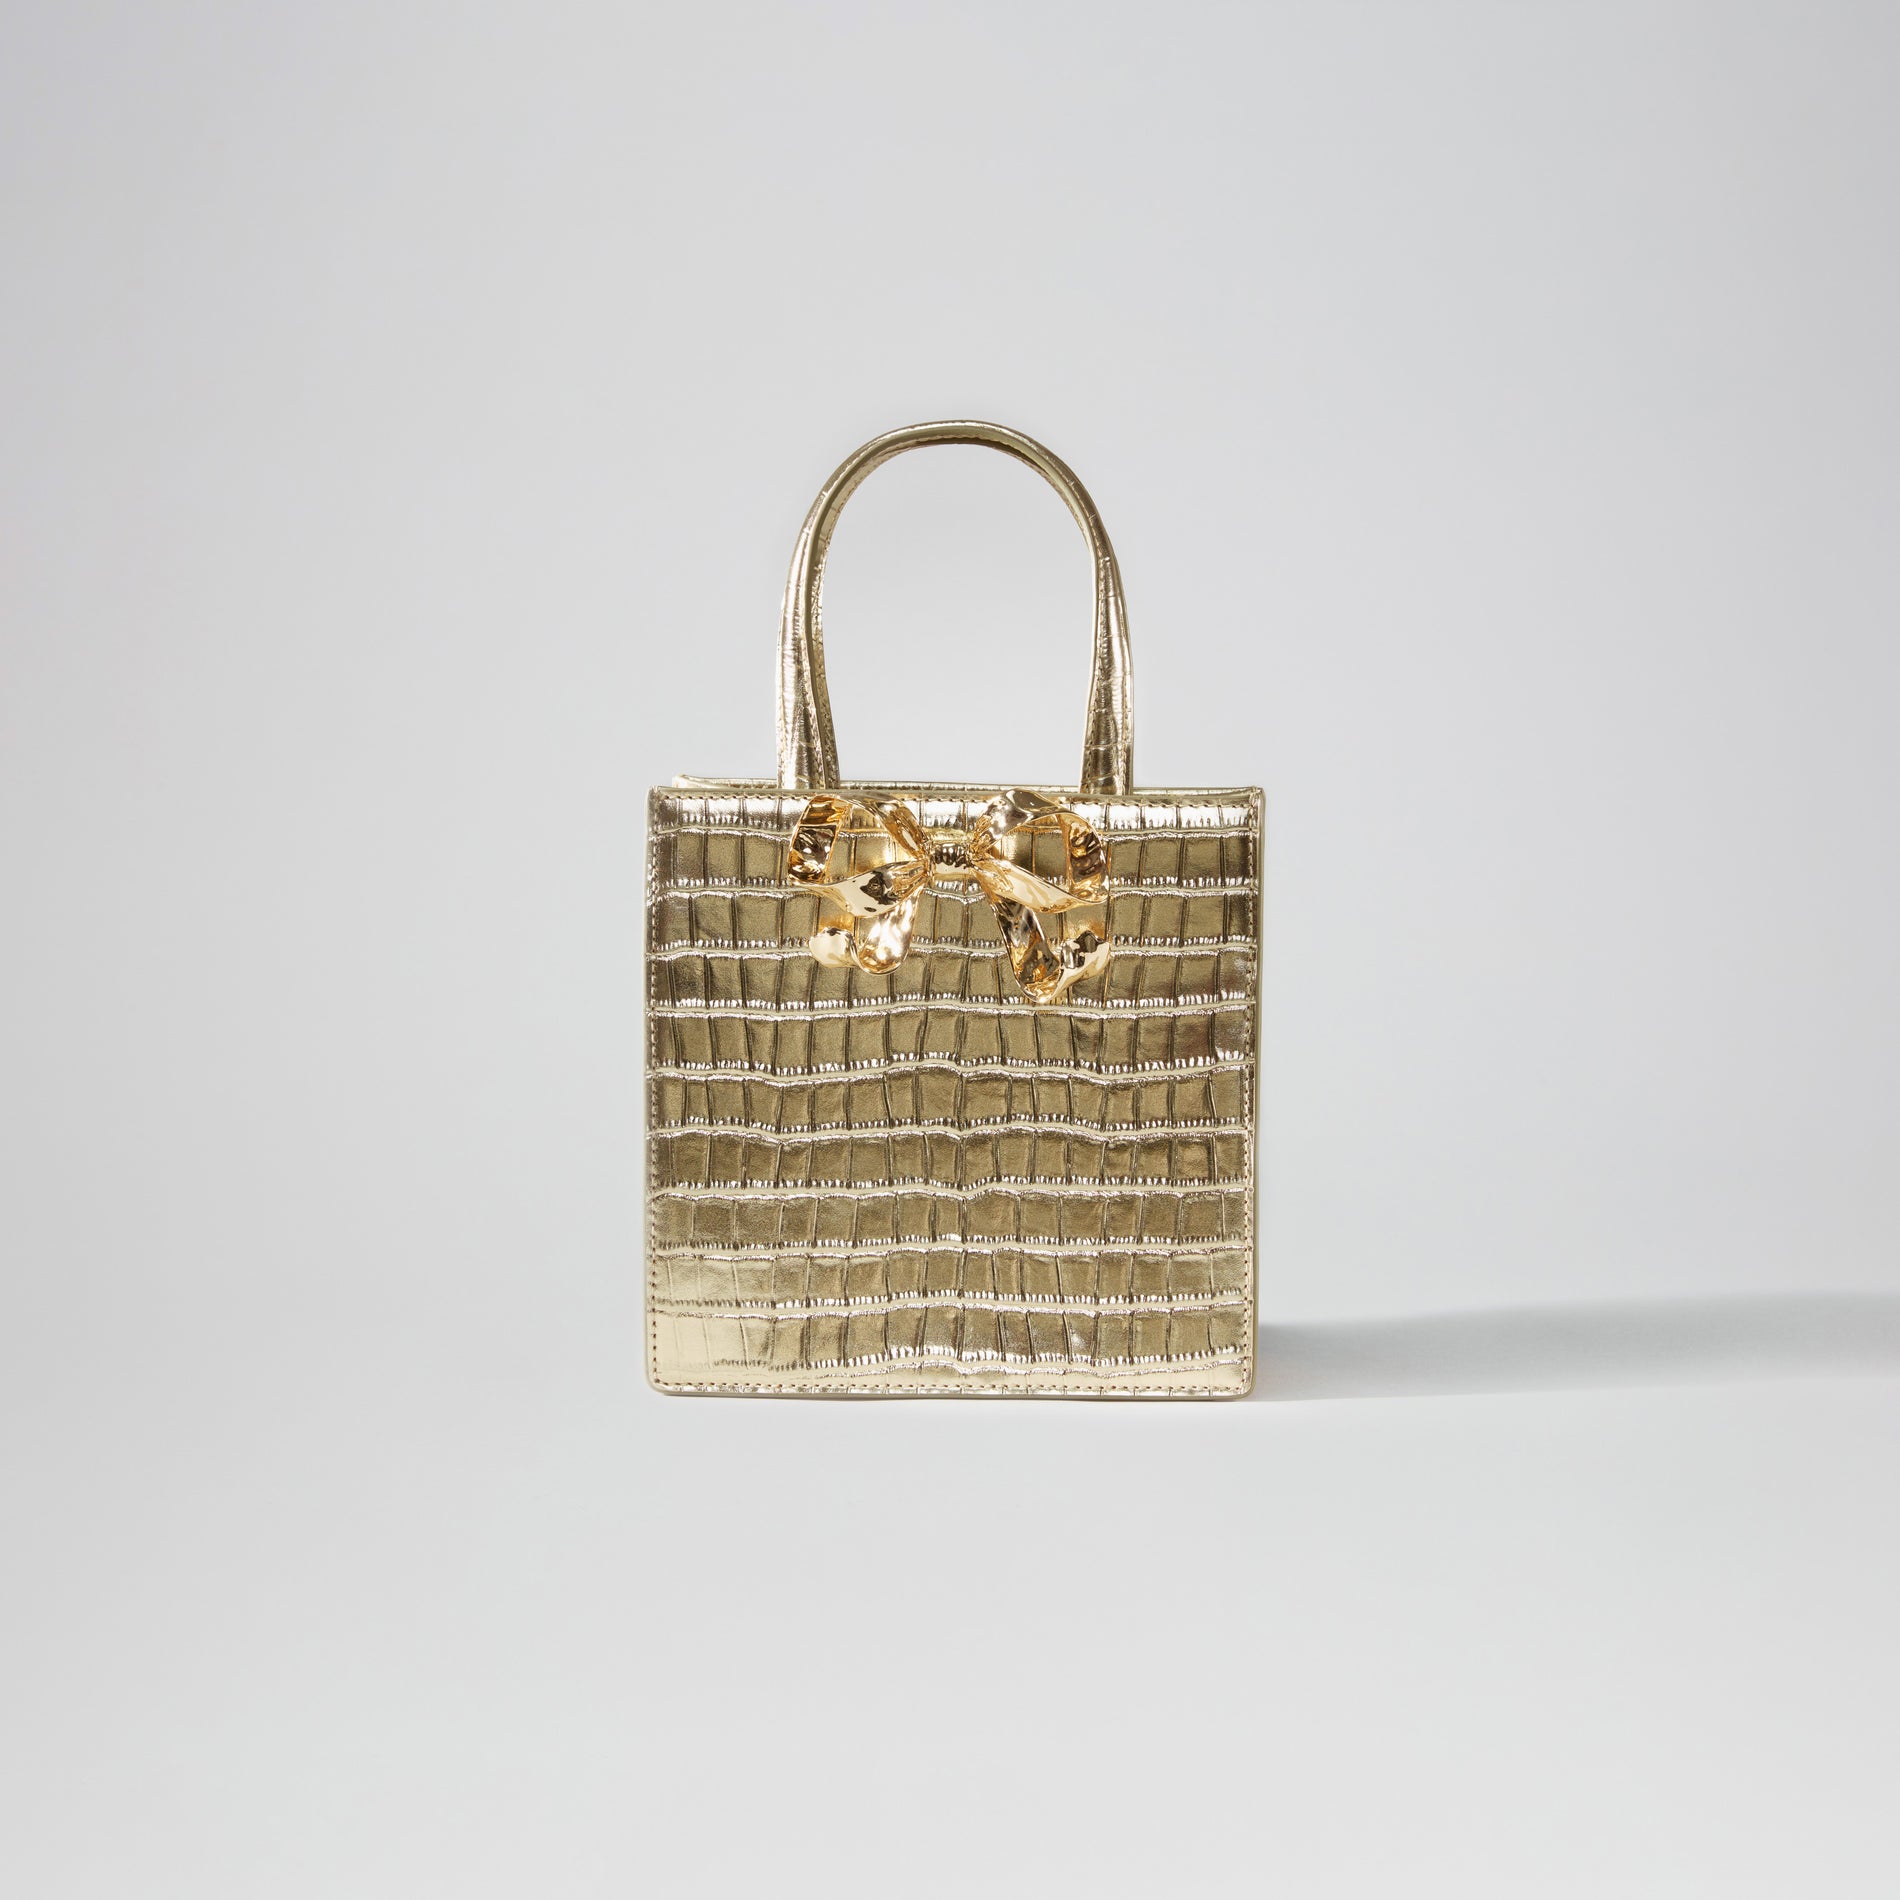 A woman wearing the Gold Croc Mini Tote Bow Bag